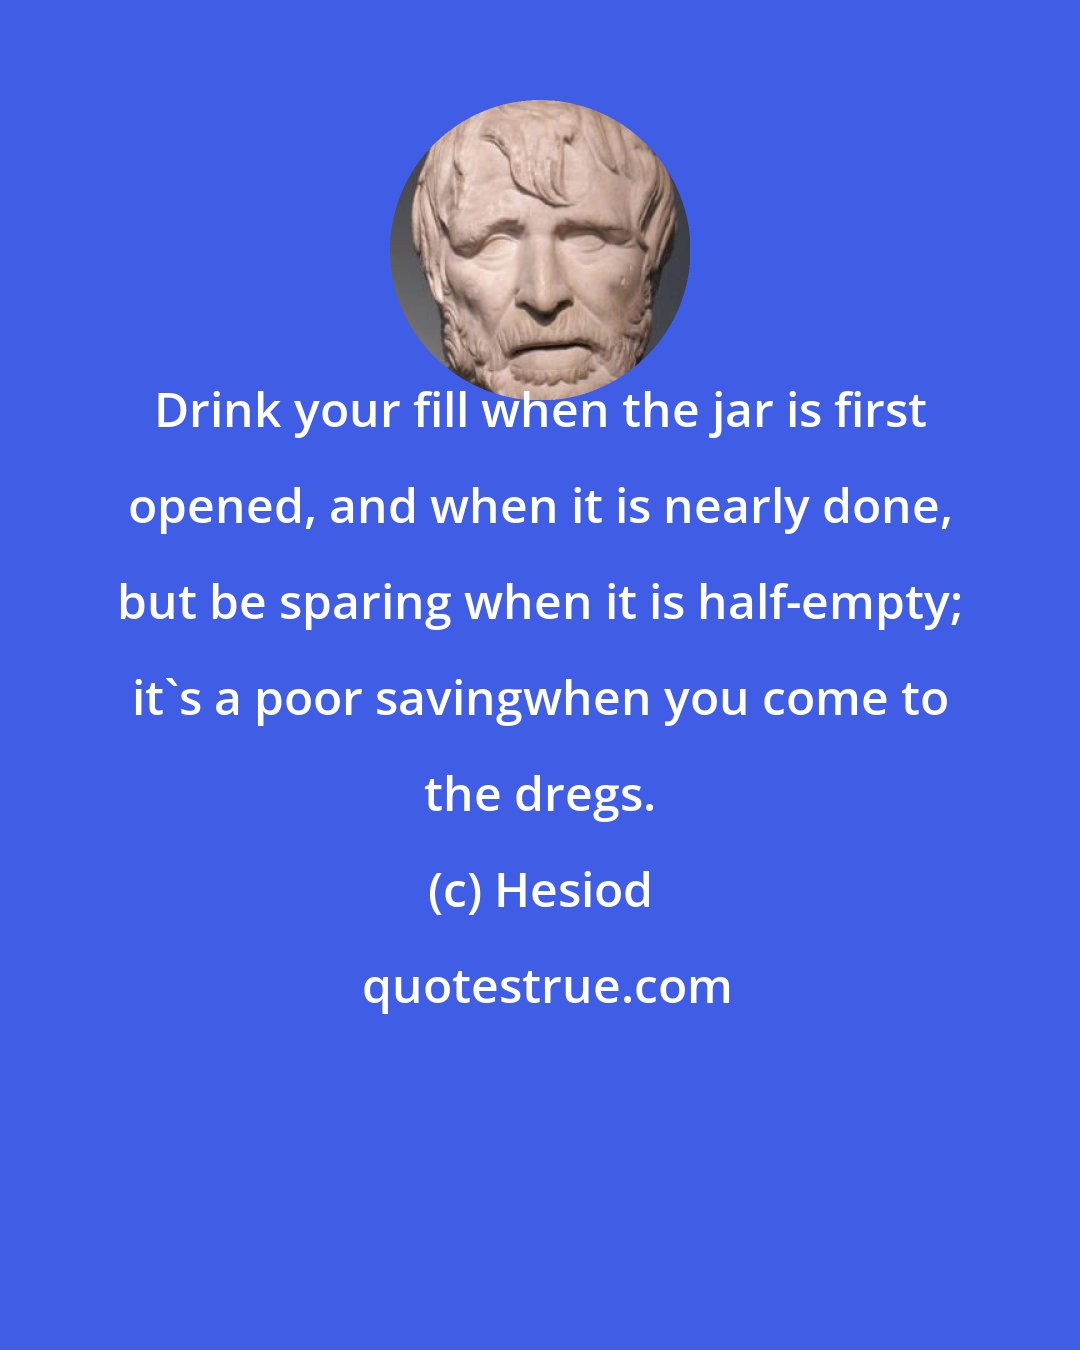 Hesiod: Drink your fill when the jar is first opened, and when it is nearly done, but be sparing when it is half-empty; it's a poor savingwhen you come to the dregs.